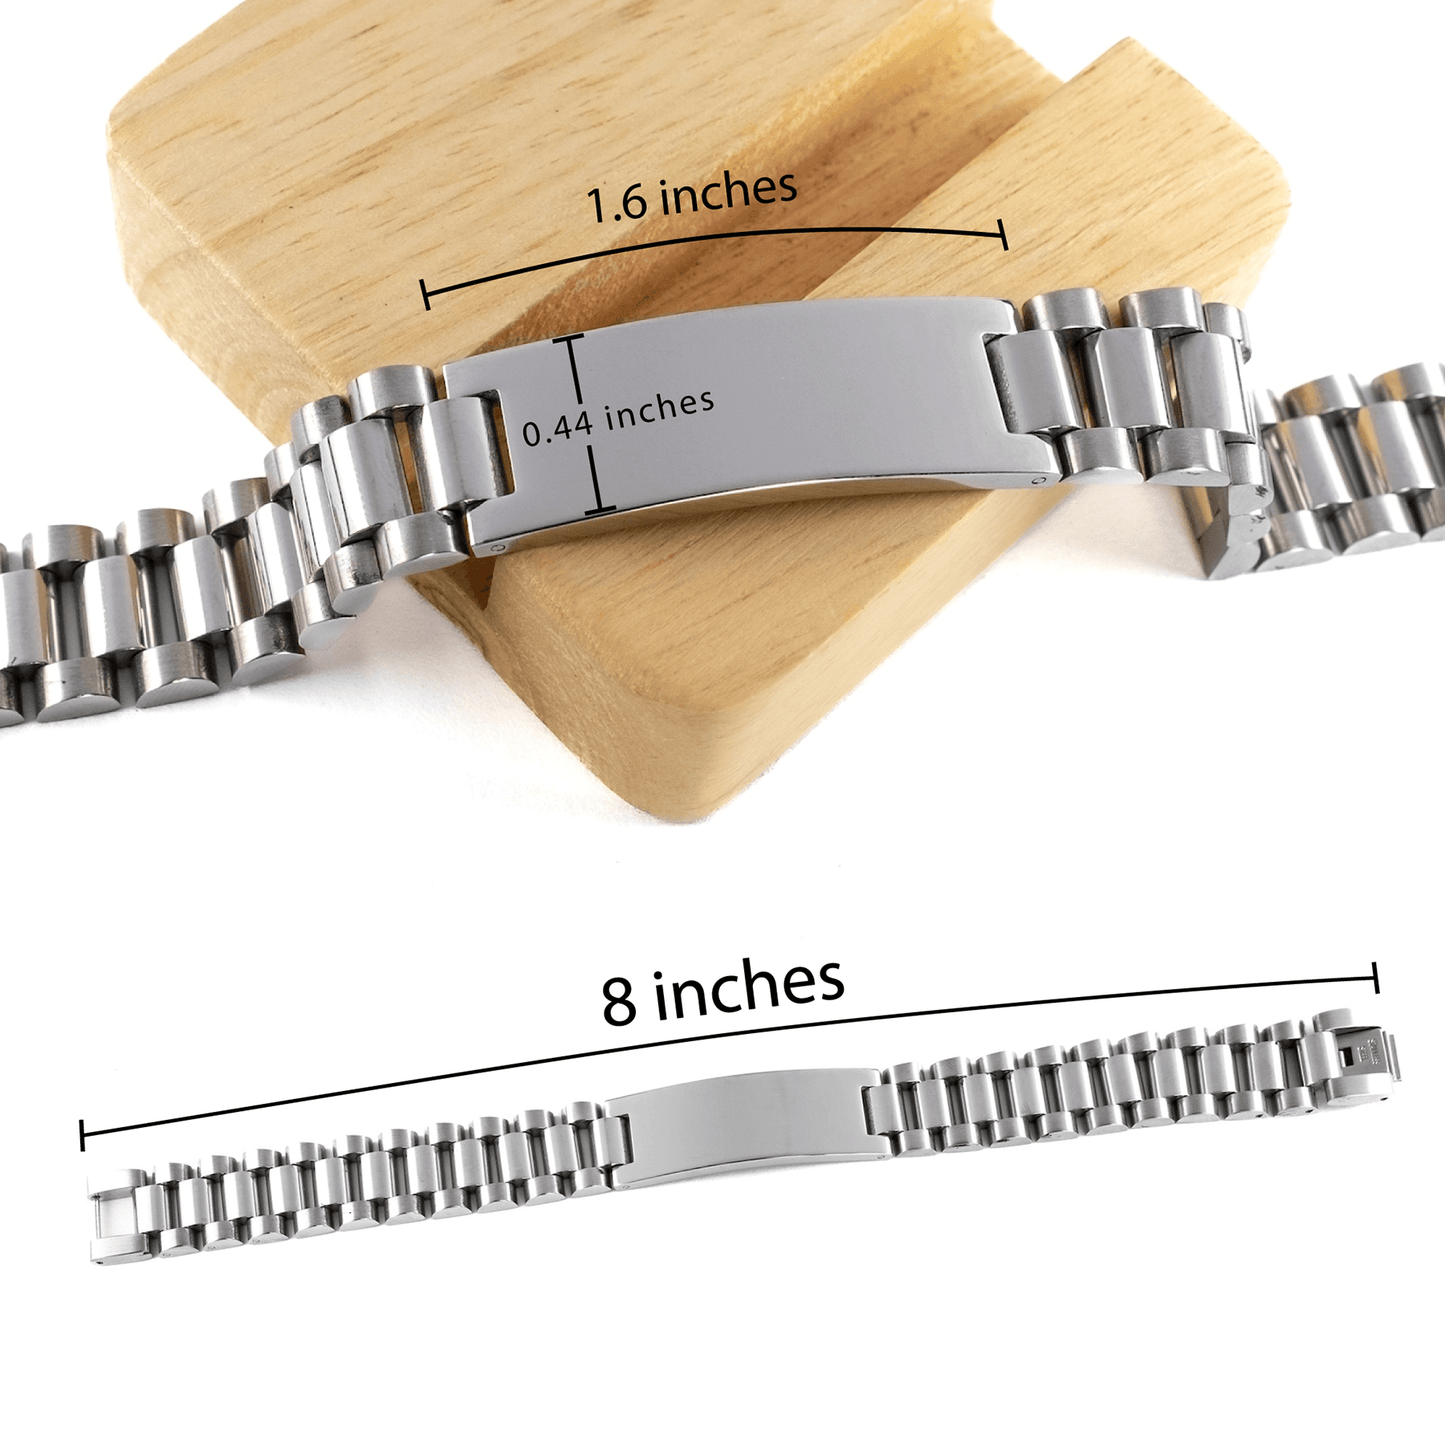 Remarkable Insurance Adjuster Gifts, Your dedication and hard work, Inspirational Birthday Christmas Unique Ladder Stainless Steel Bracelet For Insurance Adjuster, Coworkers, Men, Women, Friends